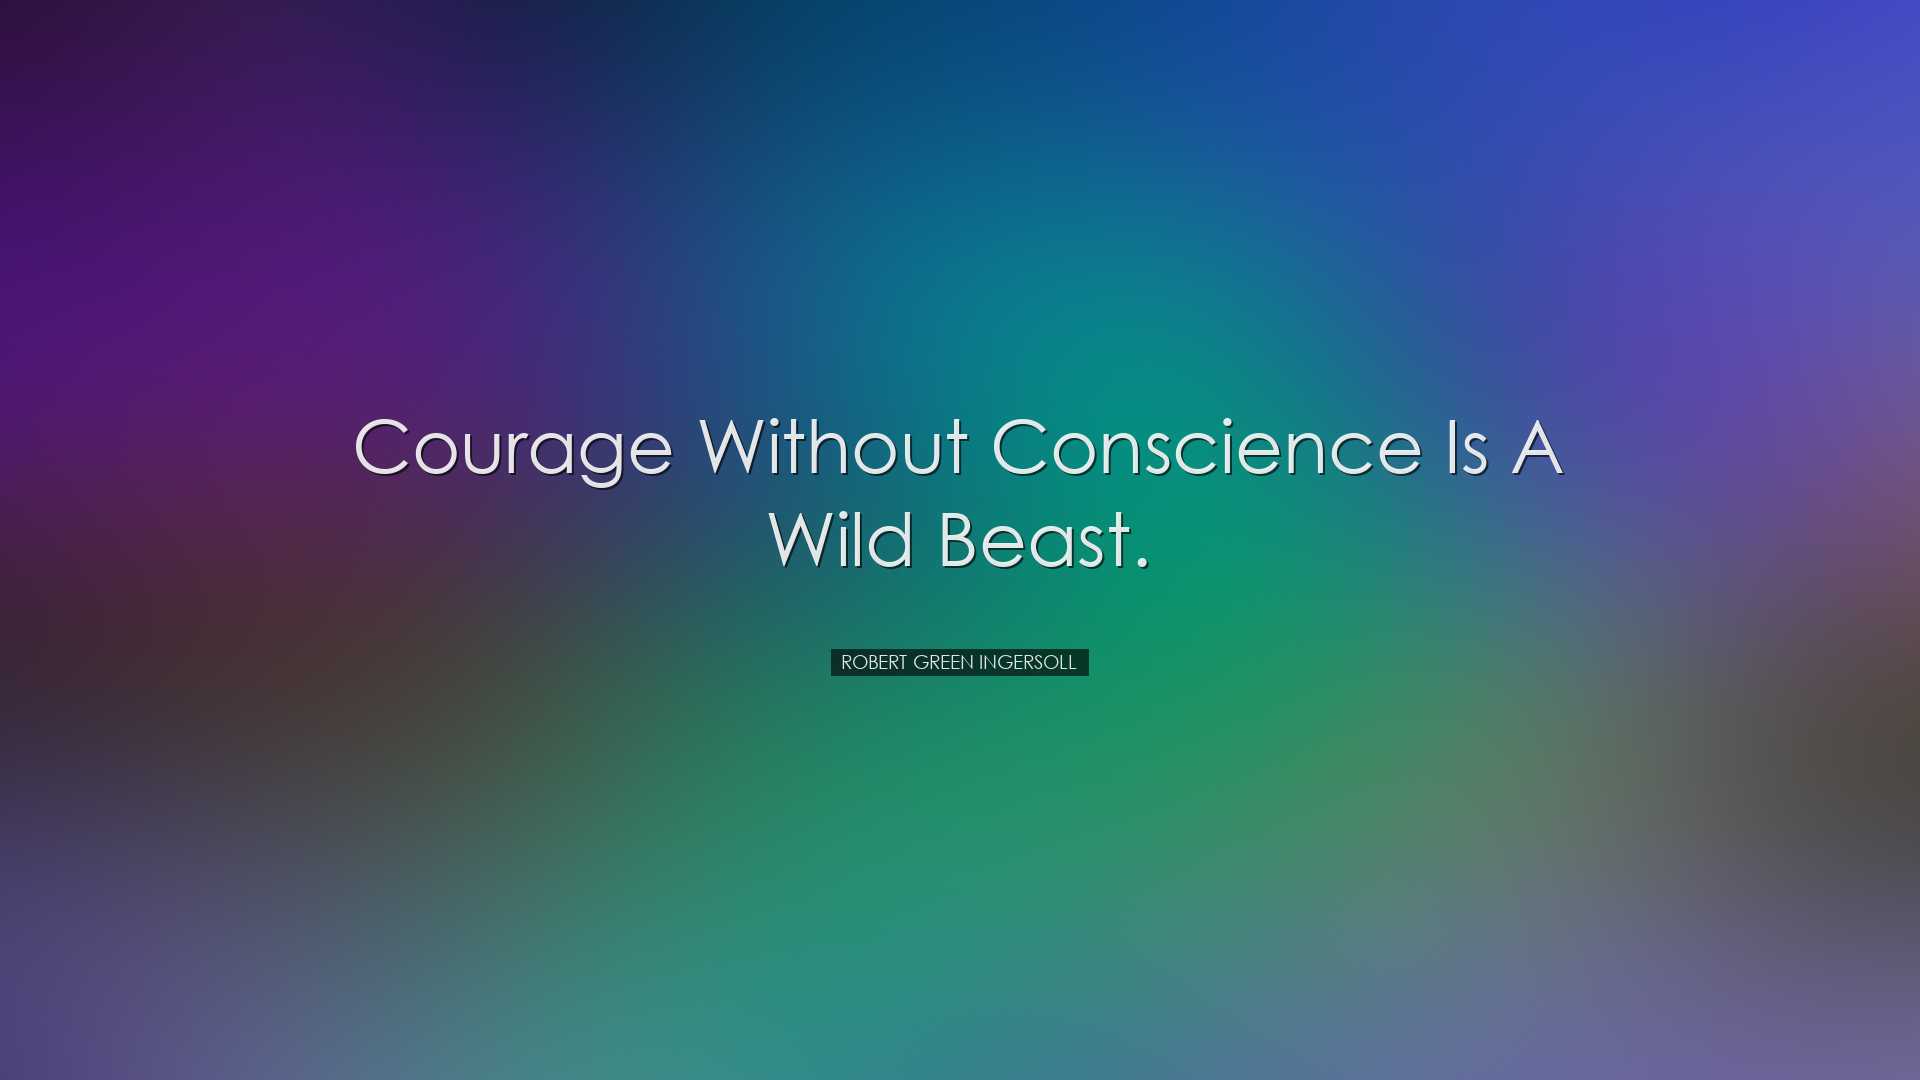 Courage without conscience is a wild beast. - Robert Green Ingerso